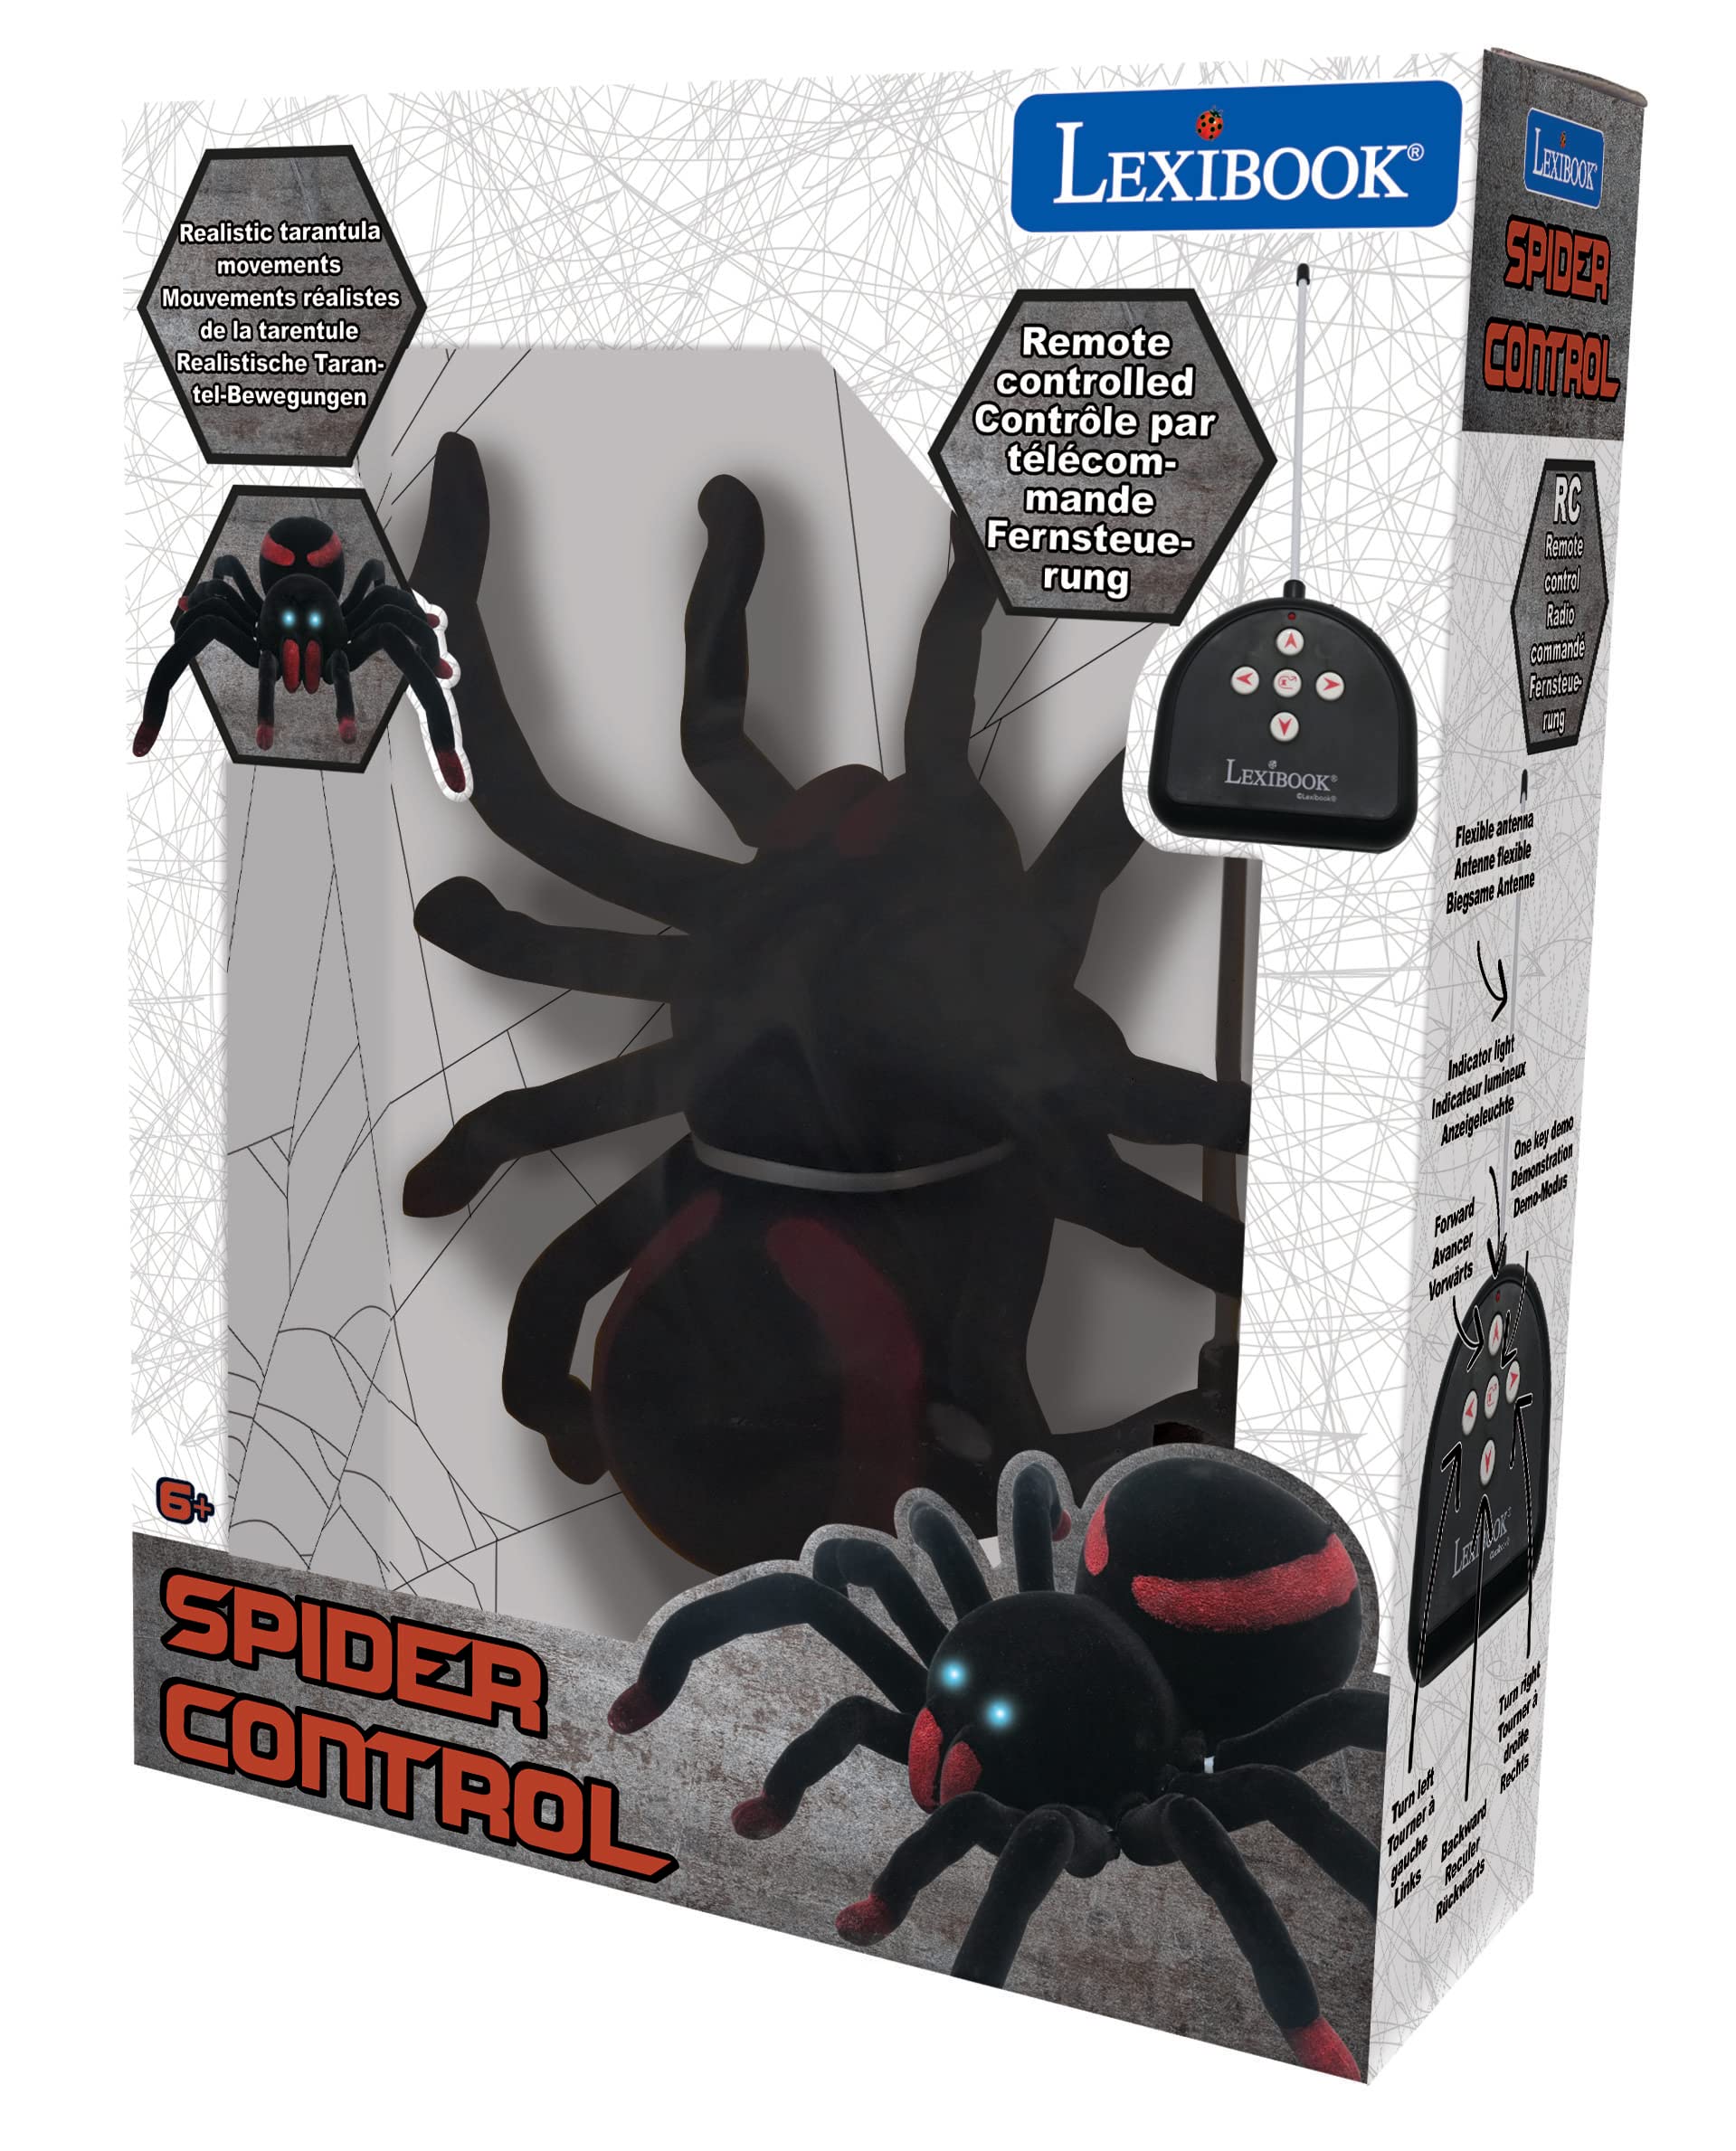 LEXiBOOK, Realistic Remote Controlled Tarantula/Spider, 8 Hairy Legs, 2 mandibles, Light Effects in The Eyes, Remote Control Included, SPIDER01